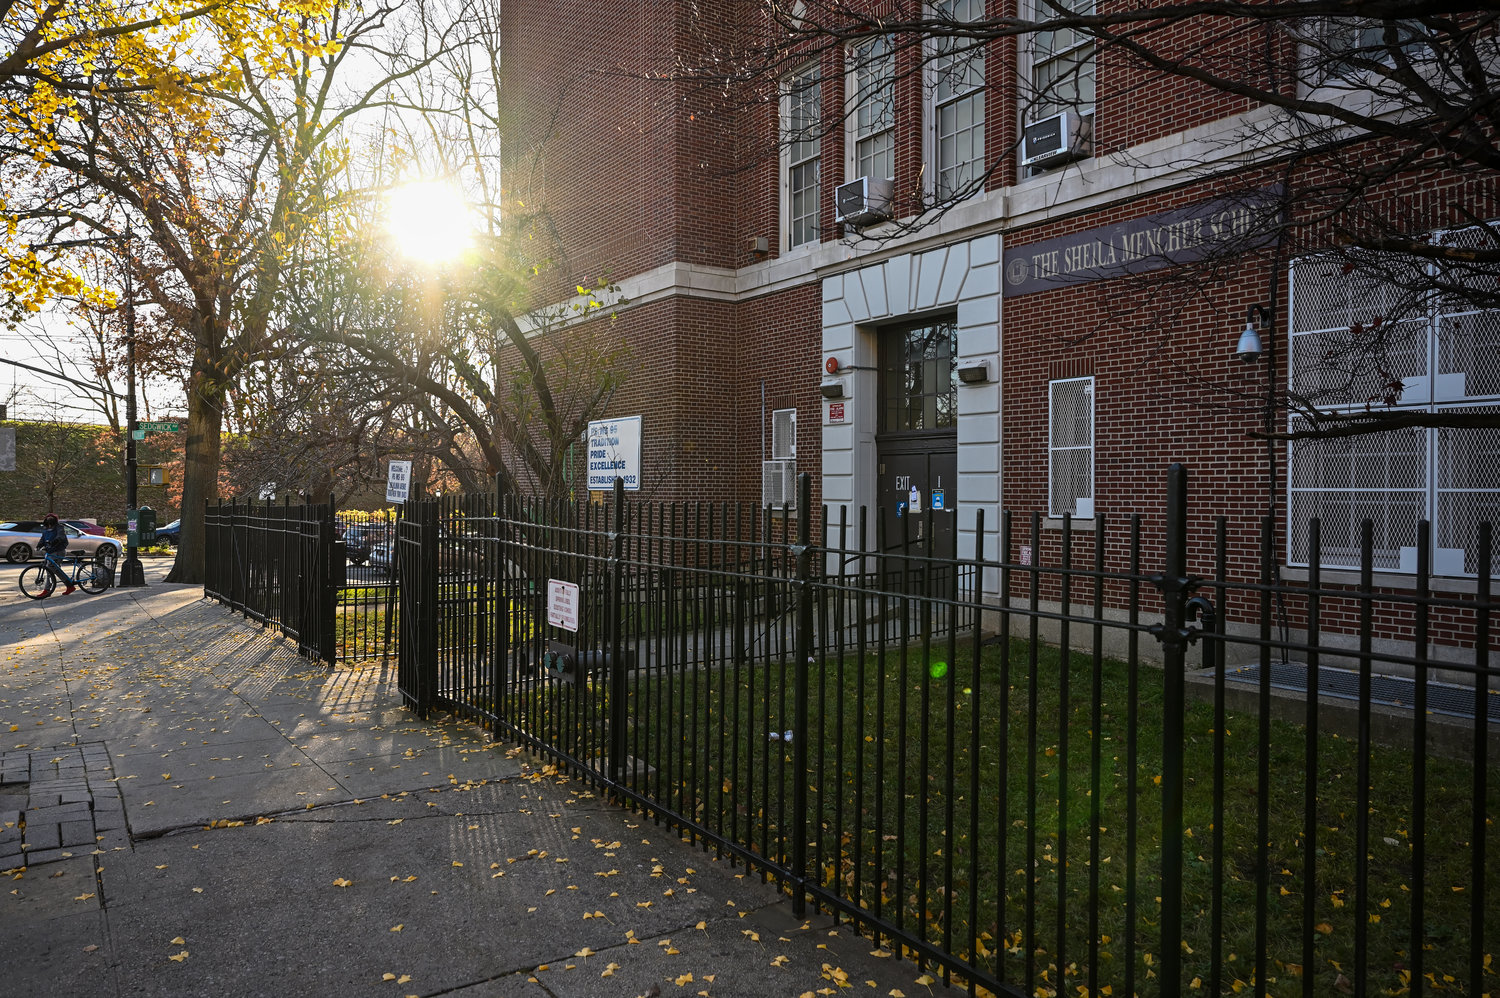 Public schools experienced a ‘phased-in’ reopening process in late September and early October. But come November, the buildings shuttered once again after the city’s weekly positive coronavirus test rate reached 3 percent.